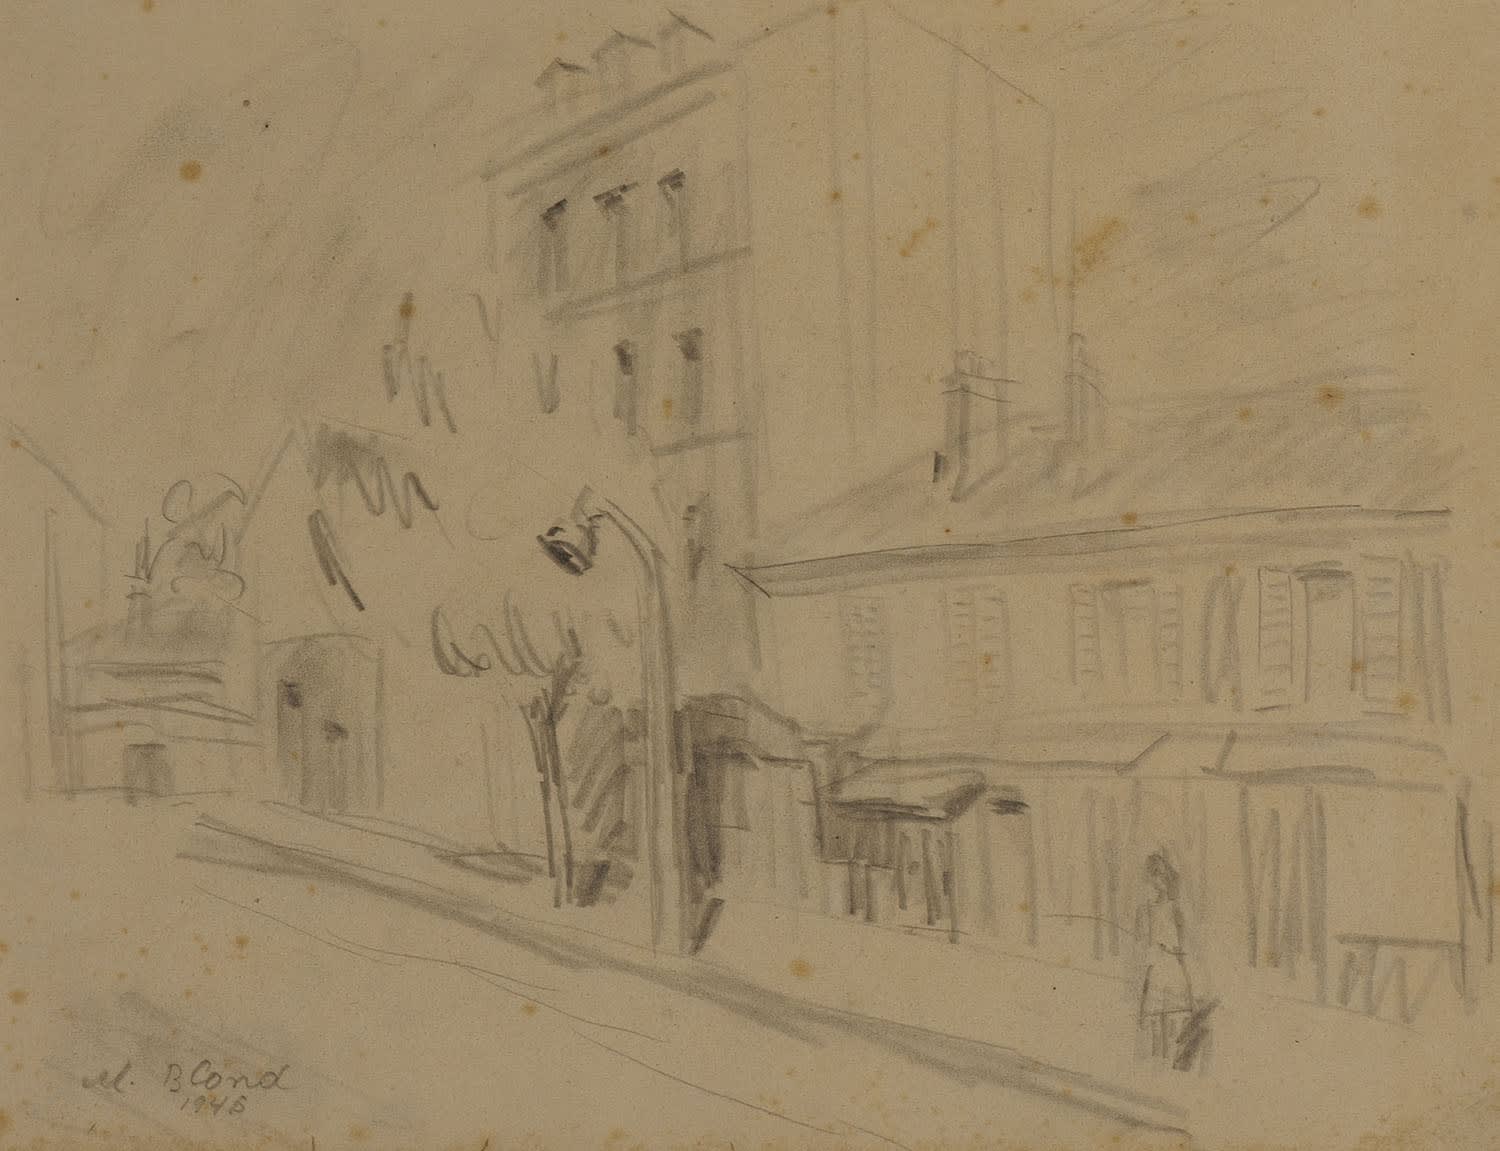 Maurice Blond (1899-1974) Parisian Street Scene 1945 Pencil on paper 31.1 x 40.6 cm Ben Uri Collection © Maurice Blond estate To see and discover more about this artist click here